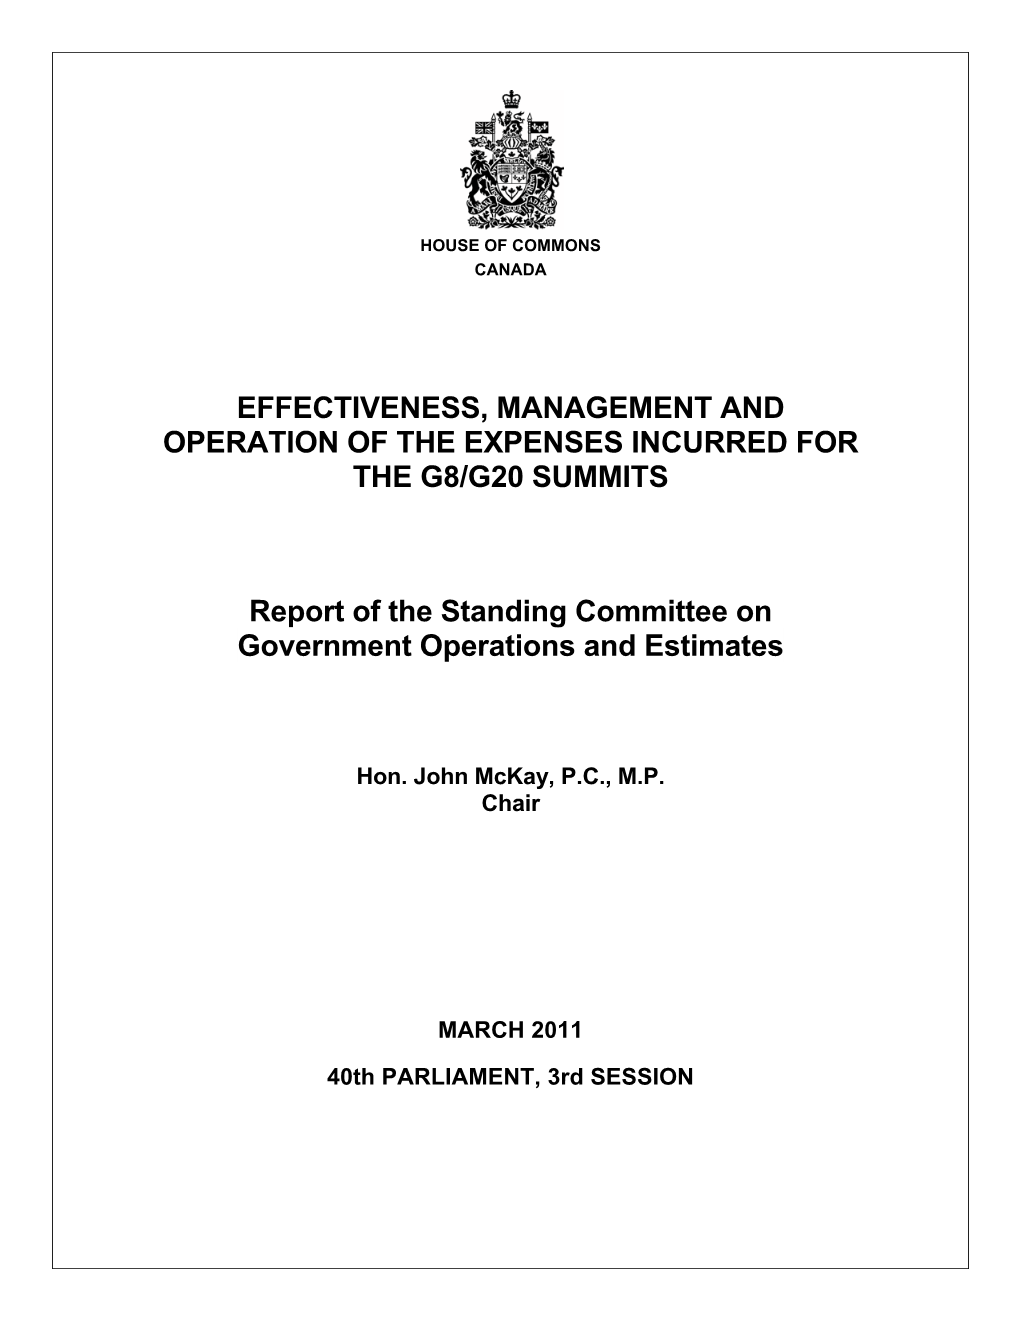 Effectiveness, Management and Operation of the Expenses Incurred for the G8/G20 Summits